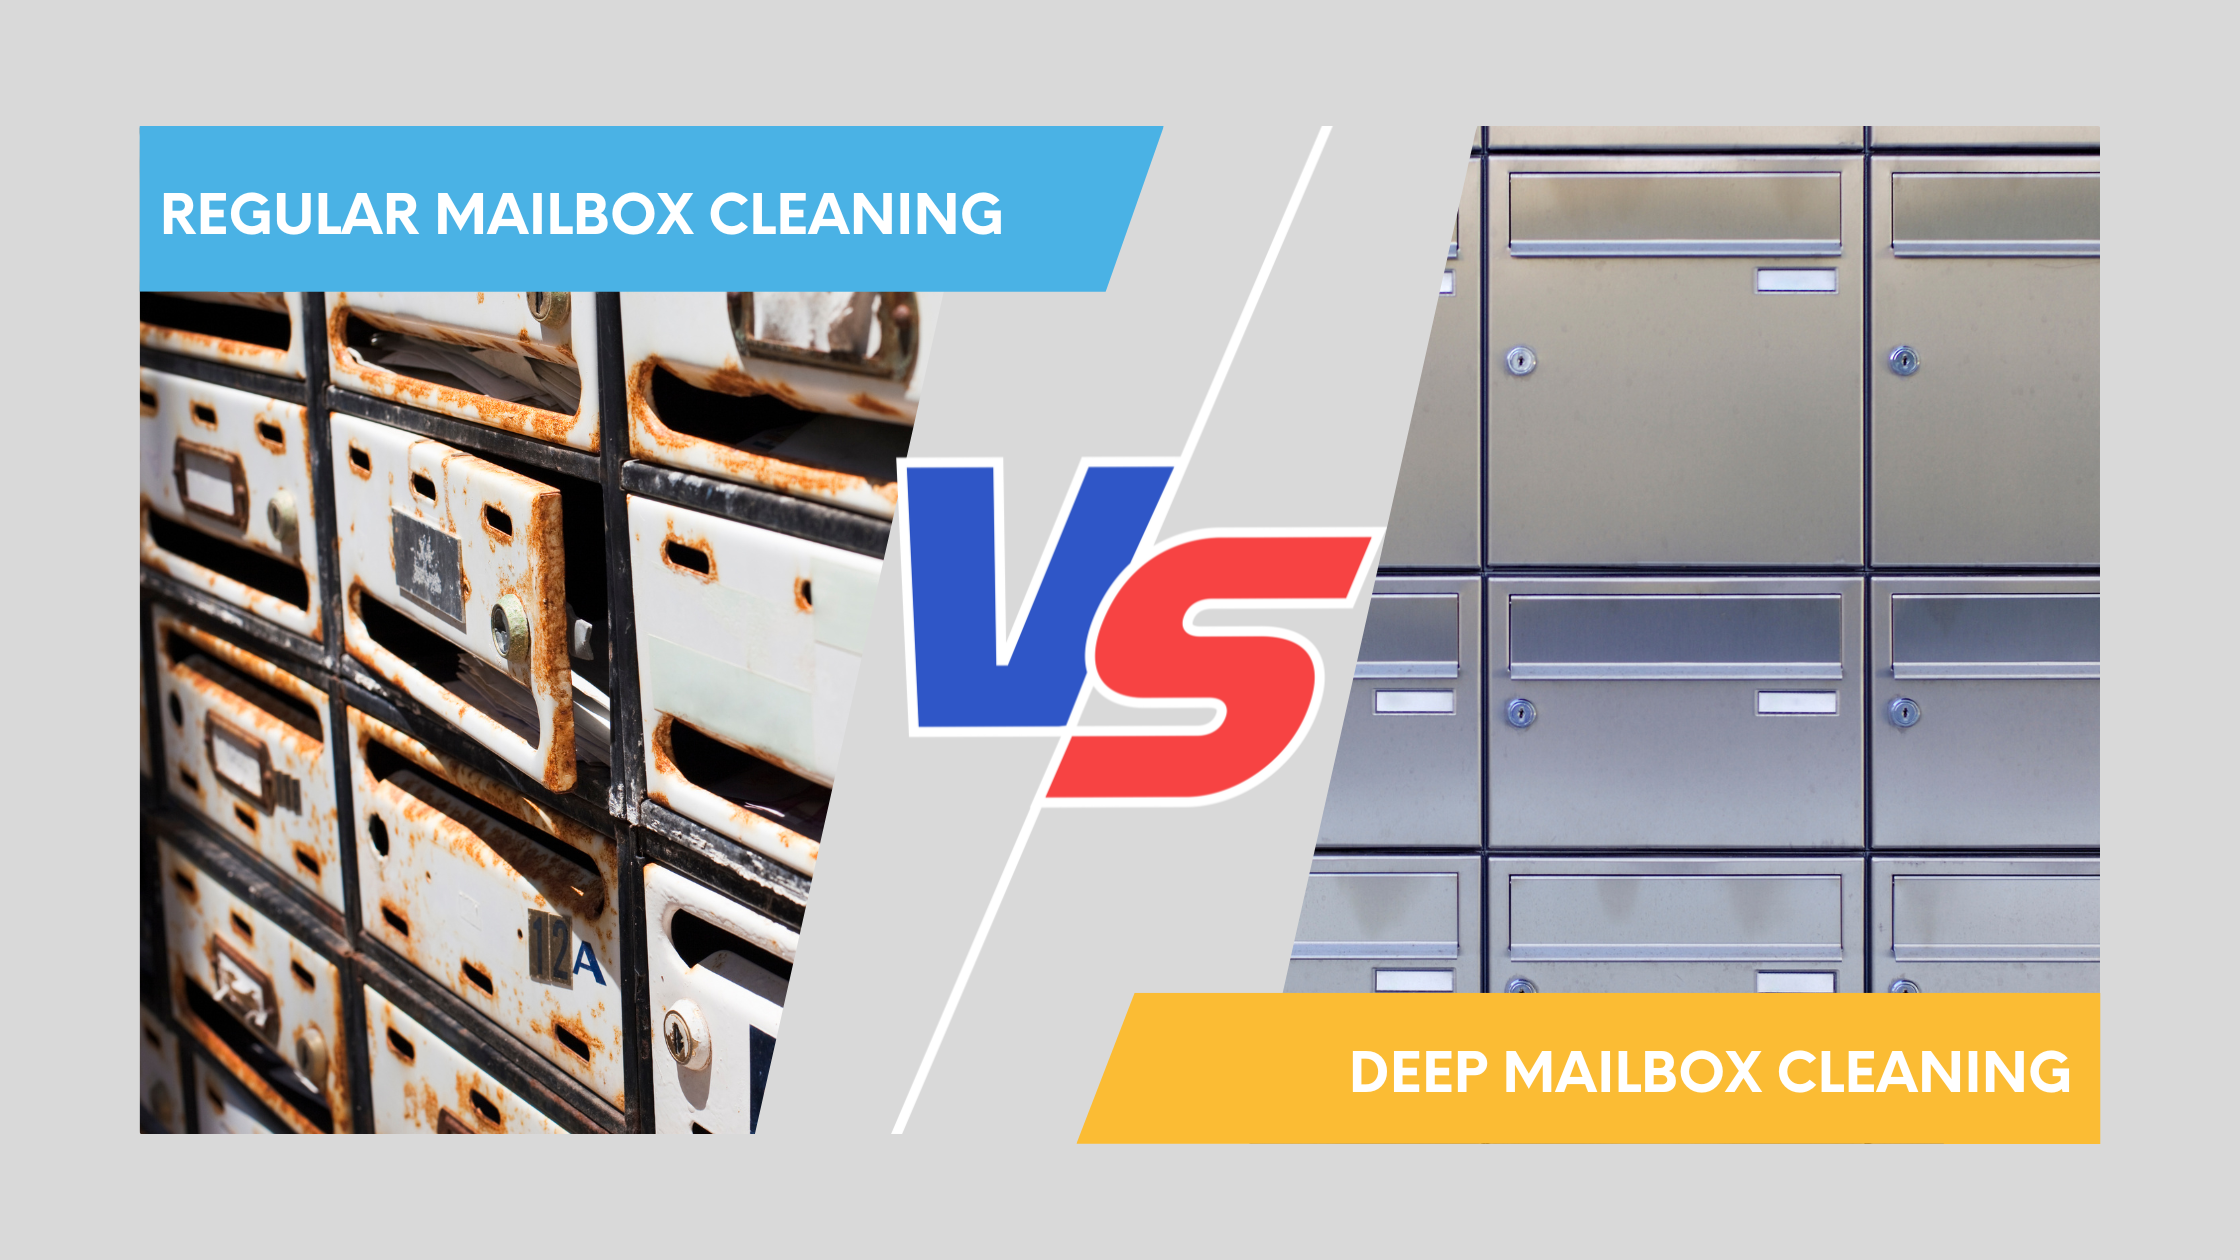 Regular cleaning vs deep cleaning of the mailbox